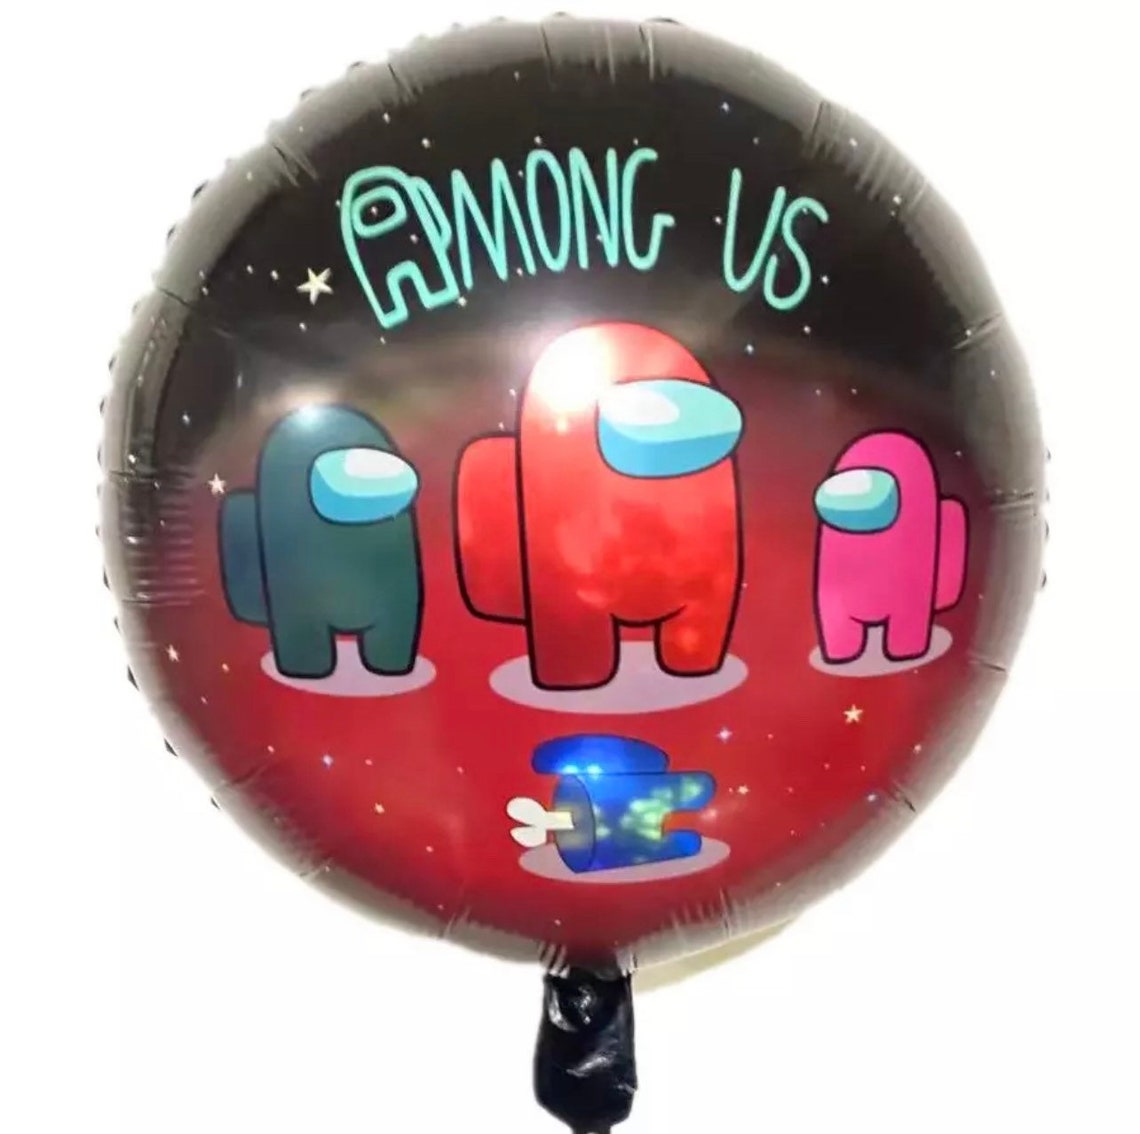 Among Us 2pcs Round Foil Balloons 18 Party Supplies Etsy